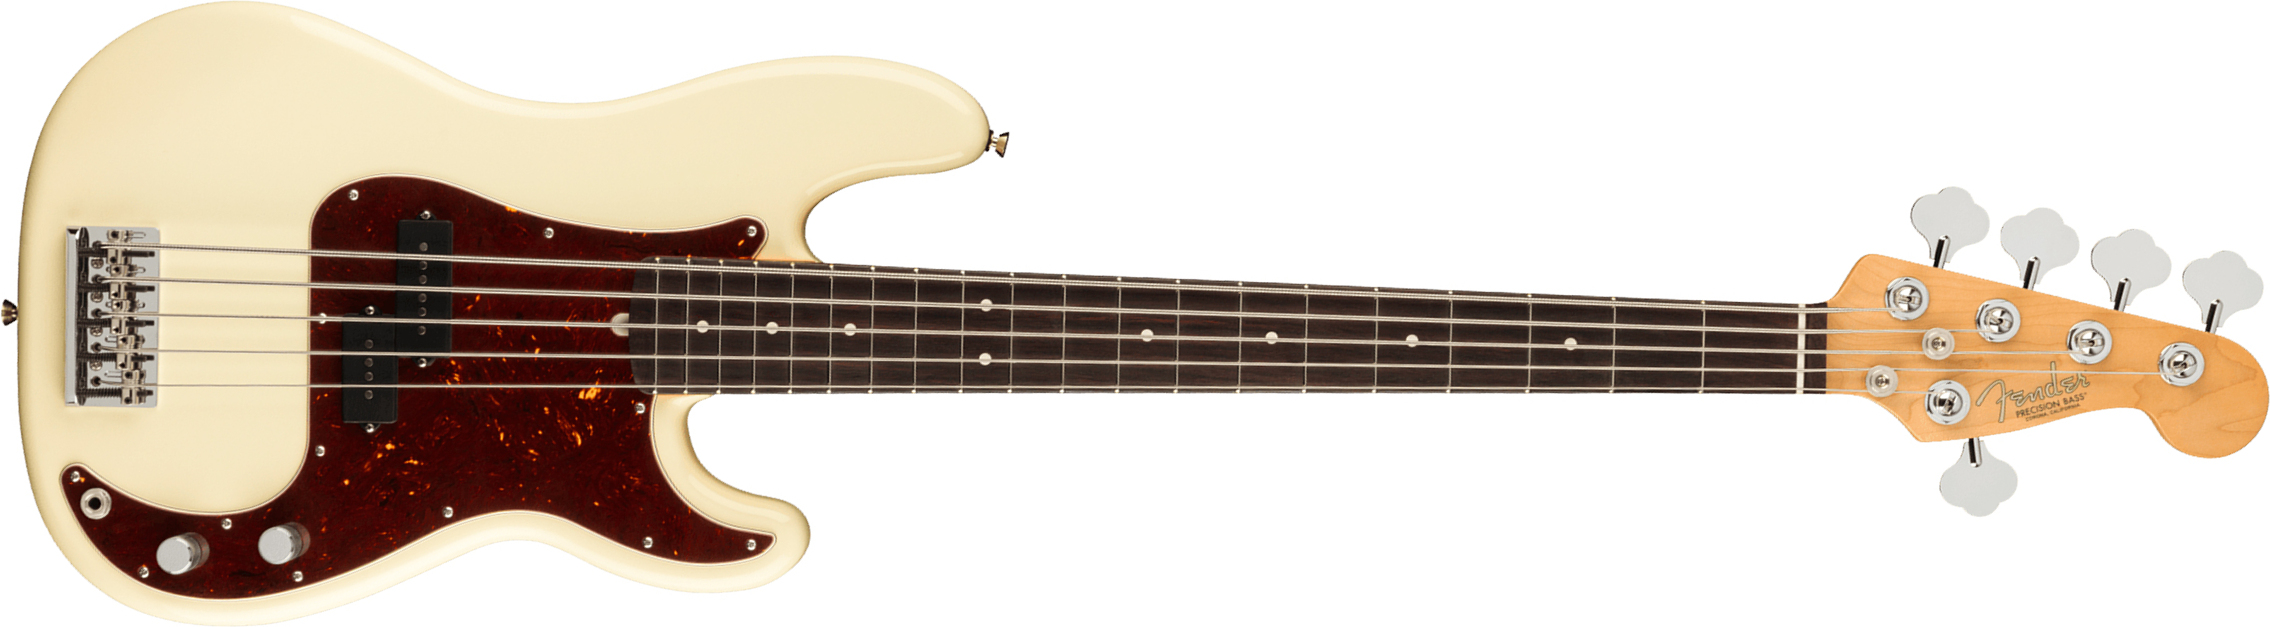 Fender Precision Bass V American Professional Ii Usa 5-cordes Rw - Olympic White - Basse Électrique Solid Body - Main picture